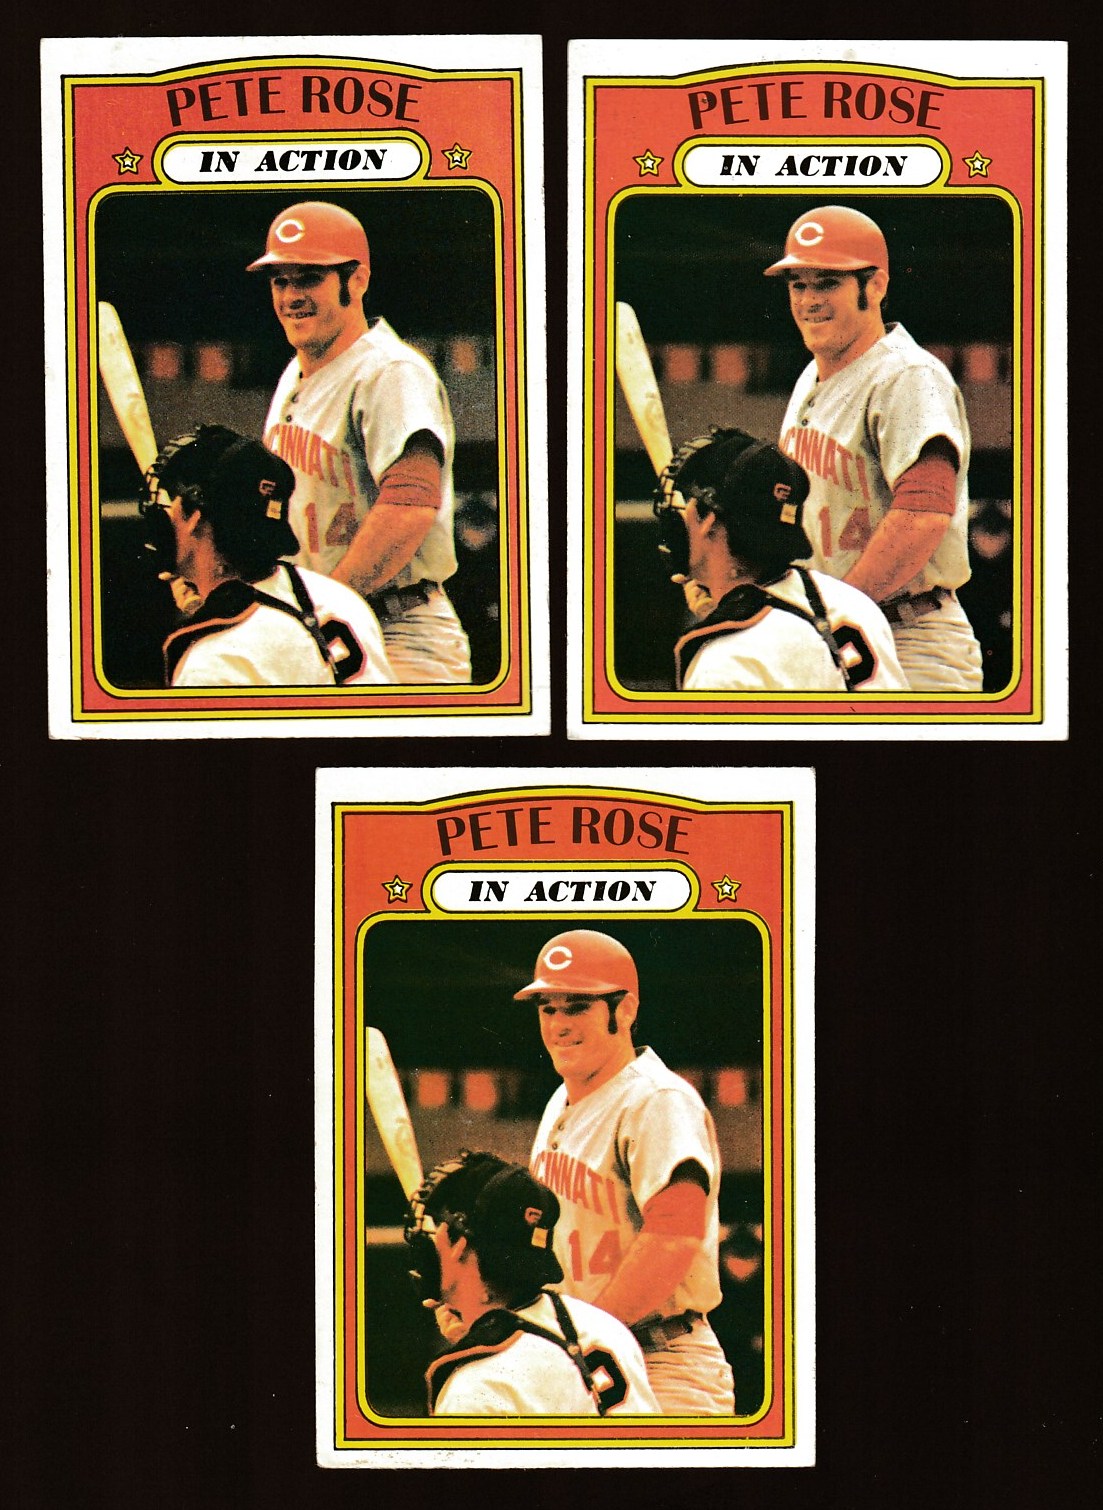 1972 Topps #560 Pete Rose In-Action (Reds) Baseball cards value